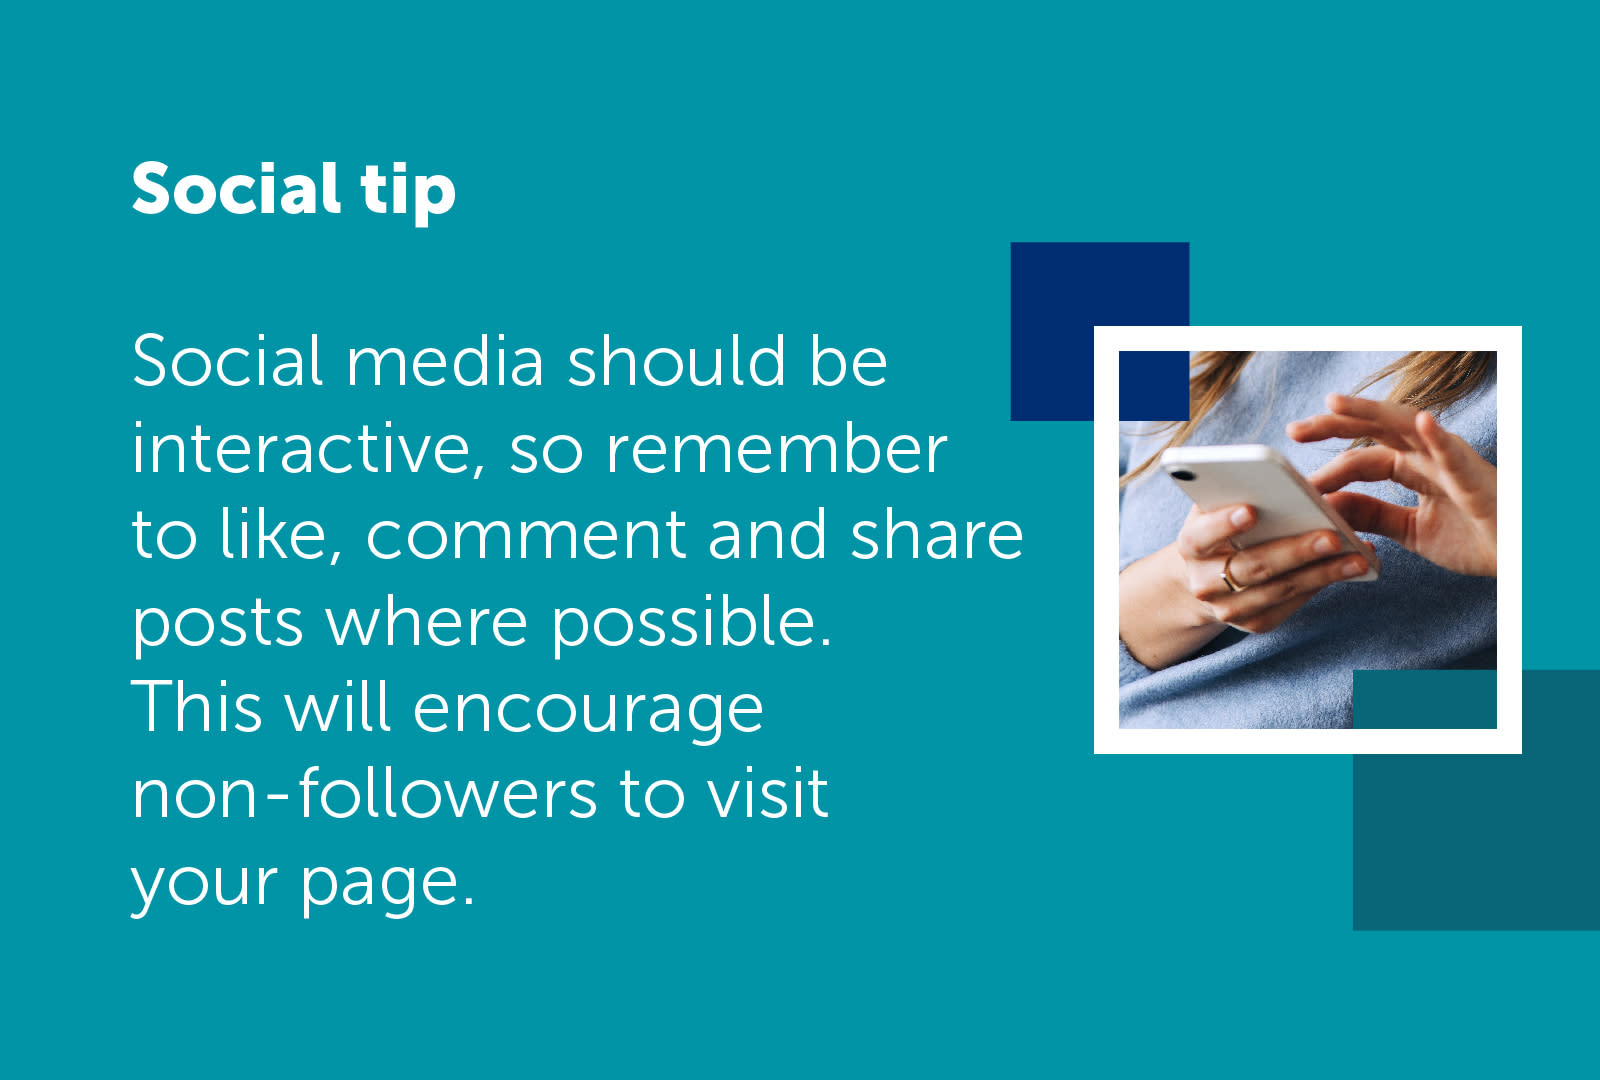 Text on image reads: Social media should be interactive, so remember to like, comment and share posts where possible. This will encourage non-followers to visit your page.